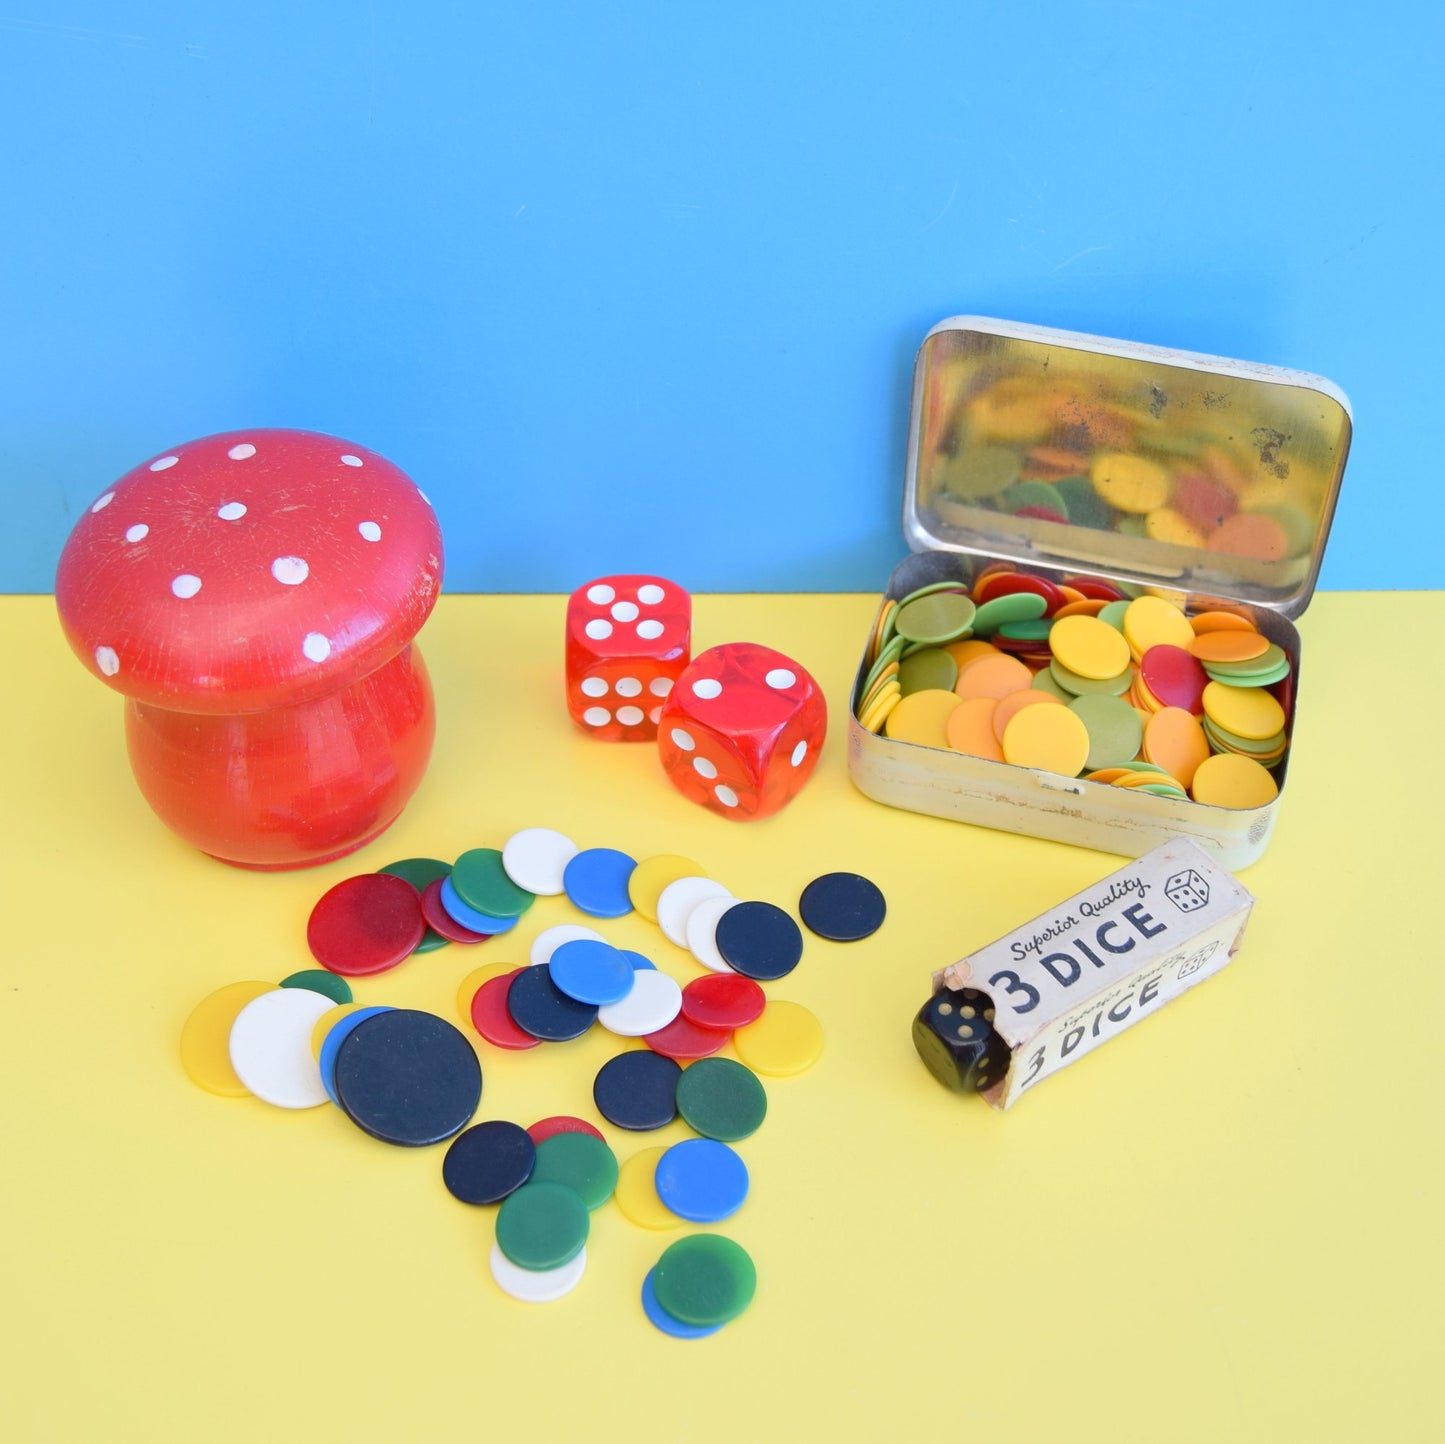 Vintage 1950s Wooden Toadstool Store & Games Bits - Dice / Counters